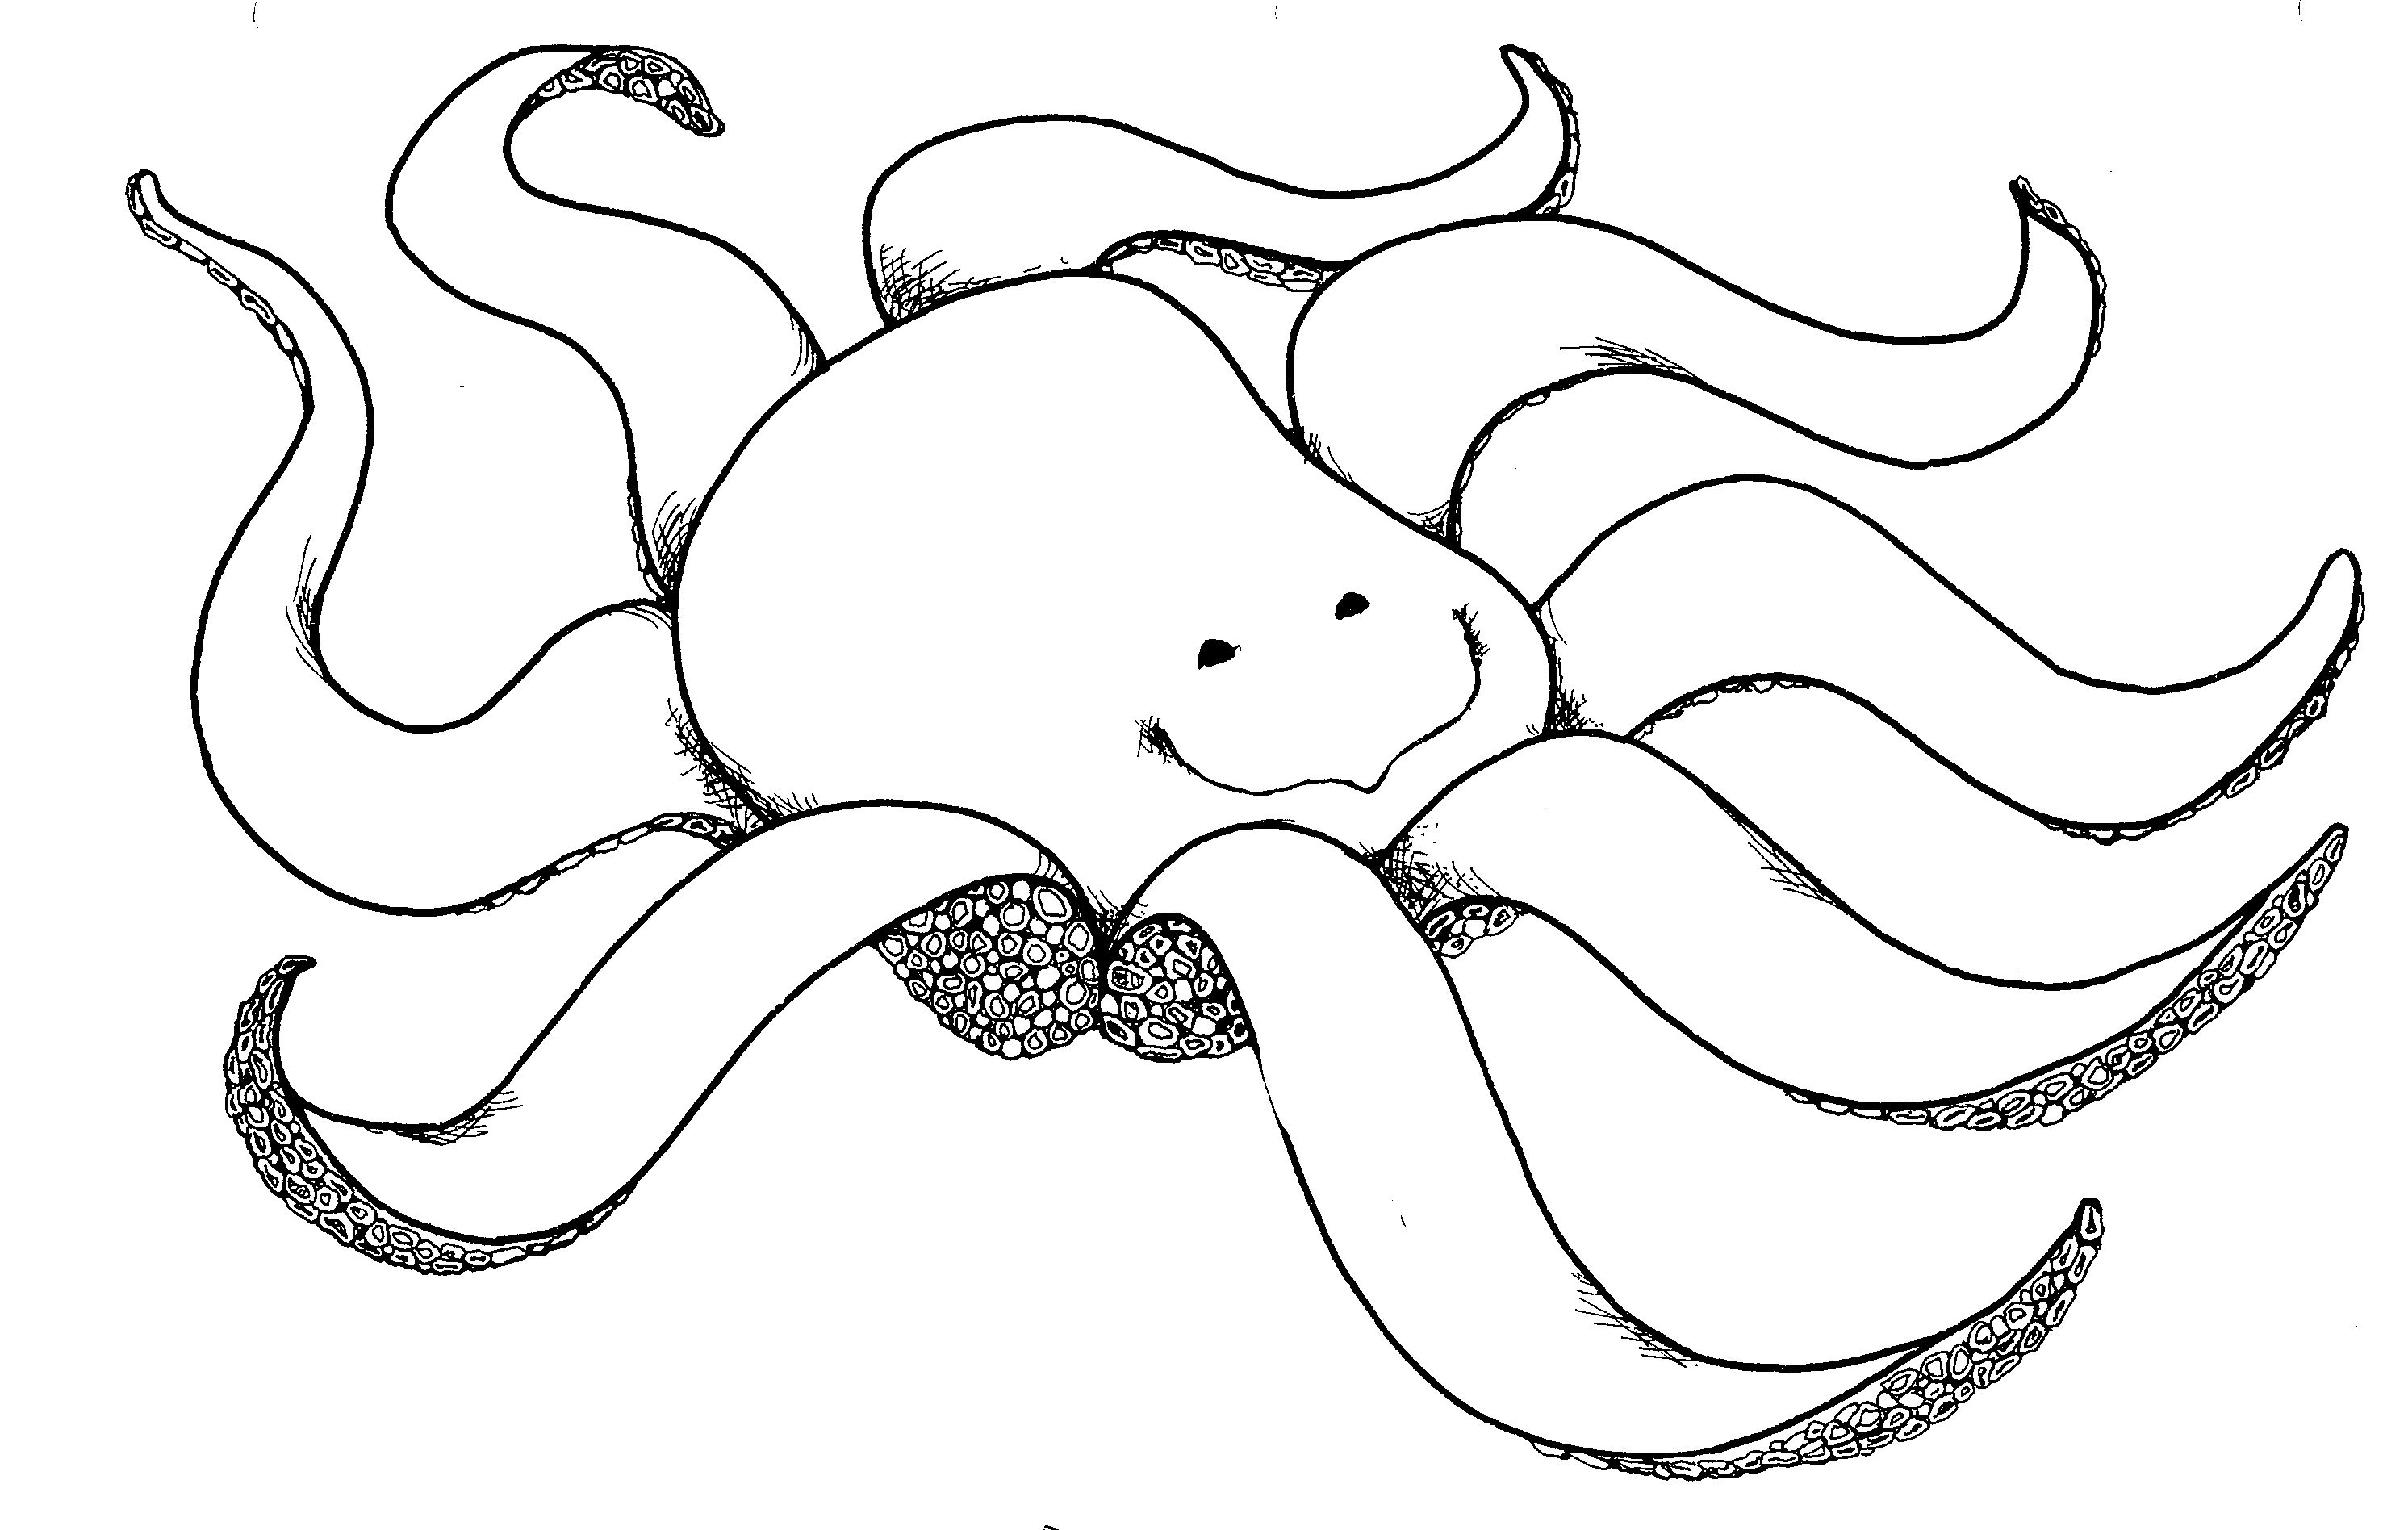 Octopus  black and white octopus clipart black and white free images 3